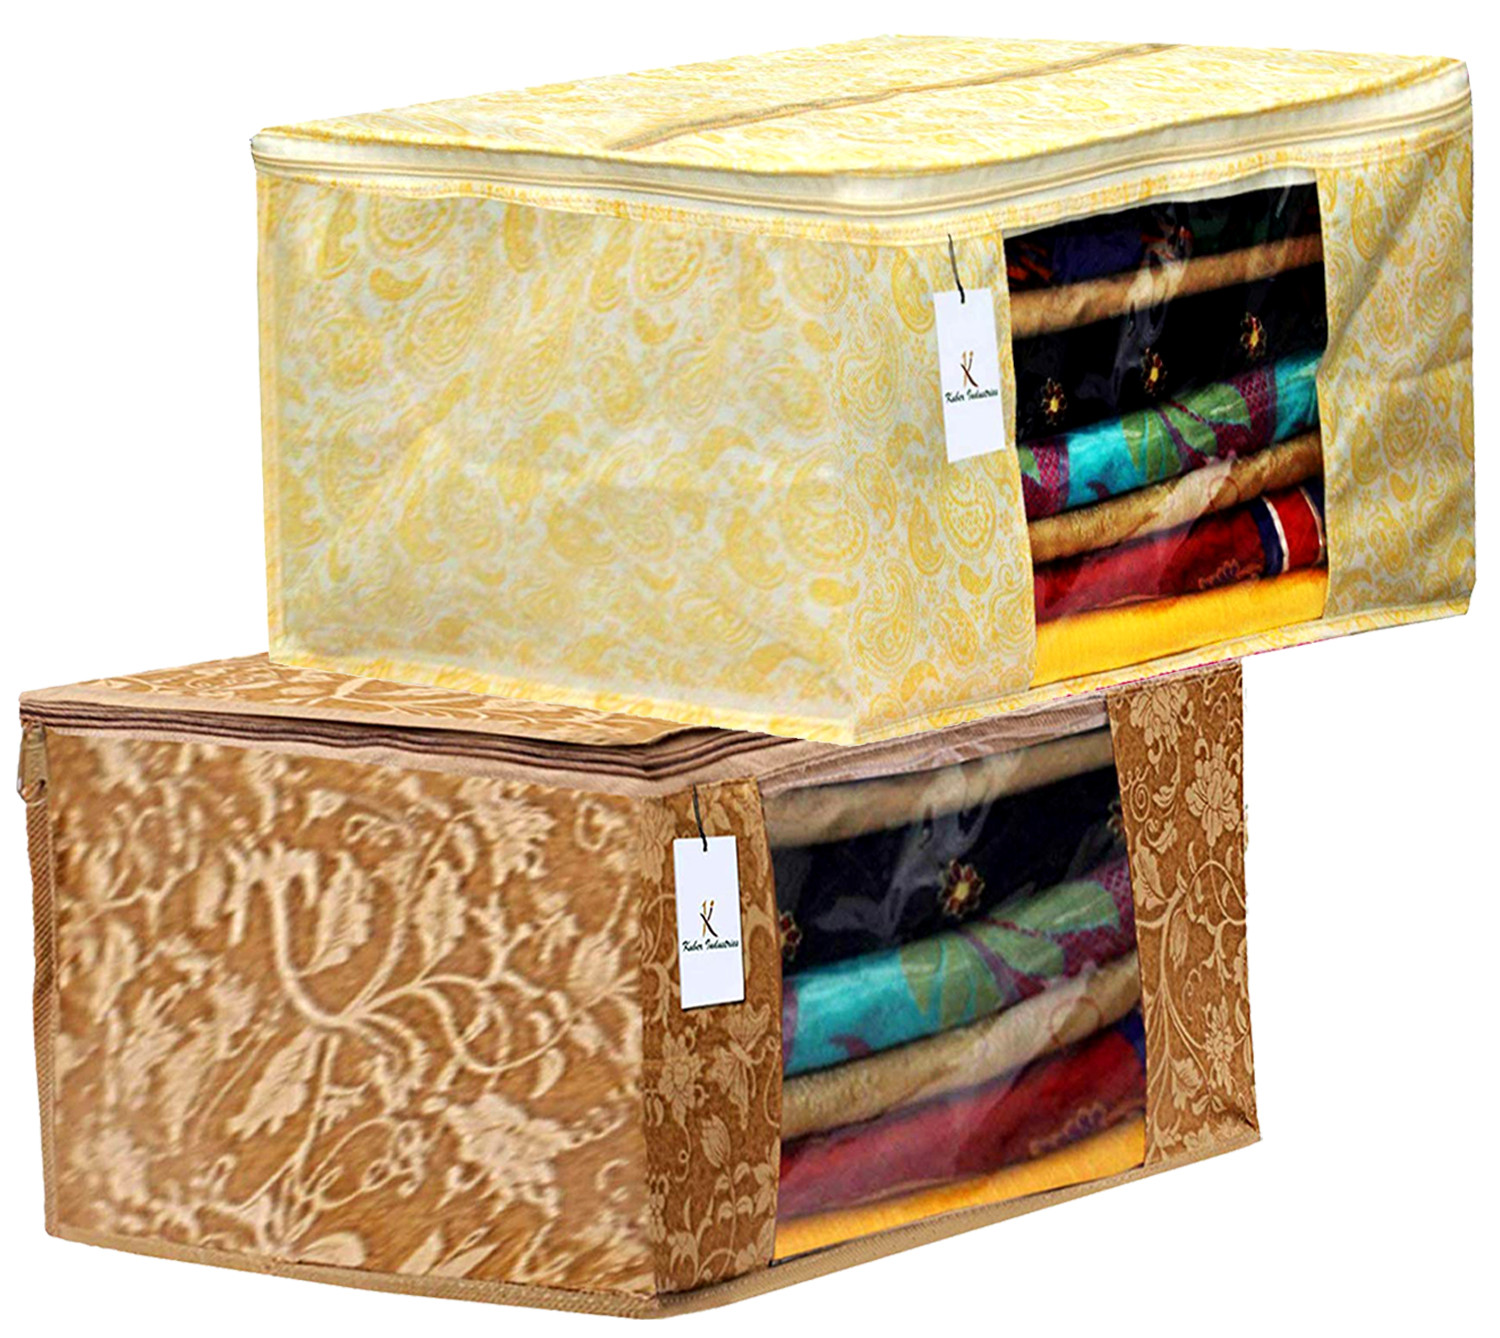 Kuber Industries Metalic Printed Non Woven Fabric Saree Cover Set with Transparent Window, Extra Large, Gold & Beige -CTKTC40783